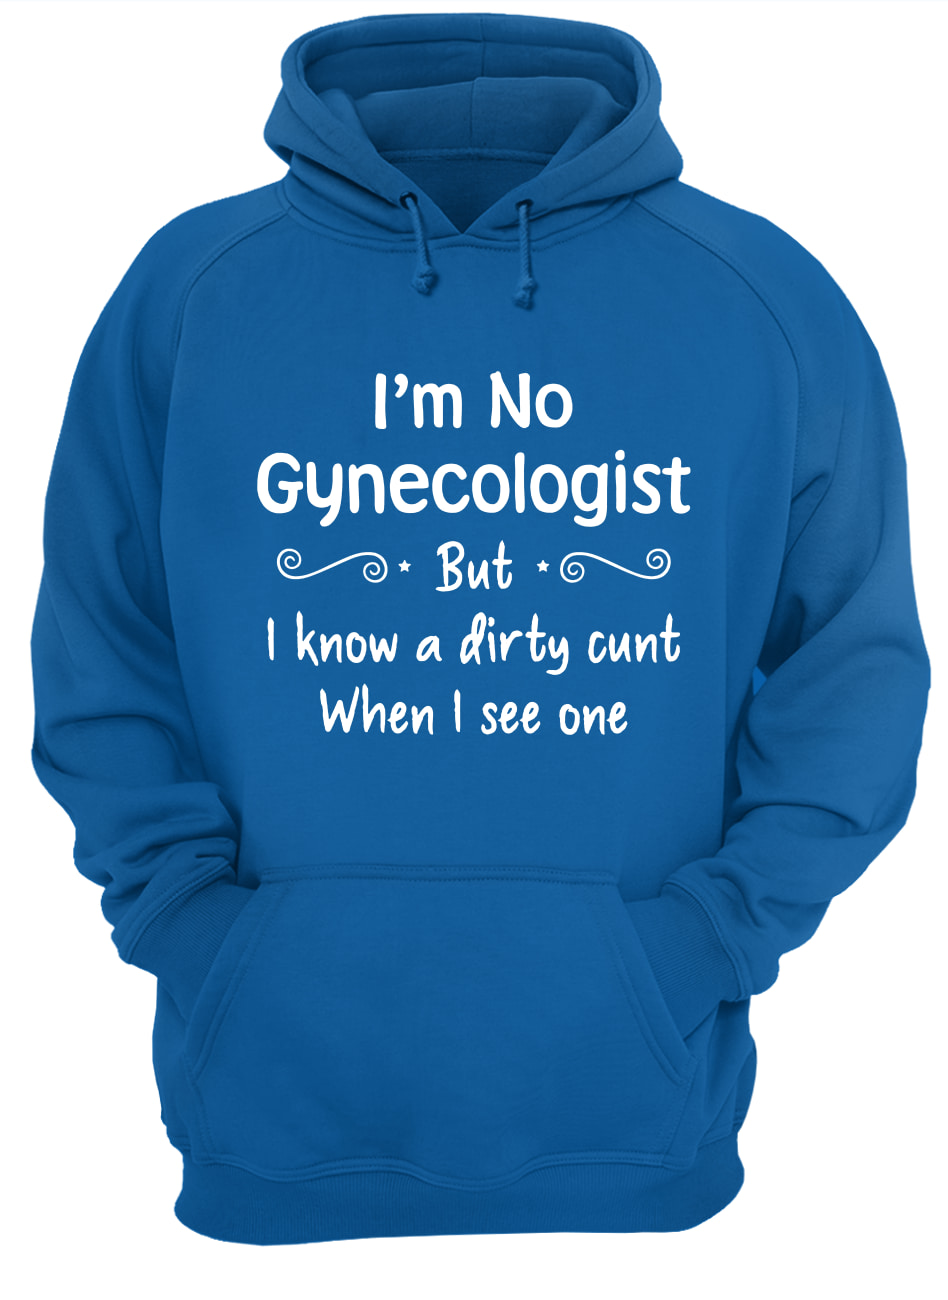 I'm not a gynecologist but I know a cunt when I see one hoodie